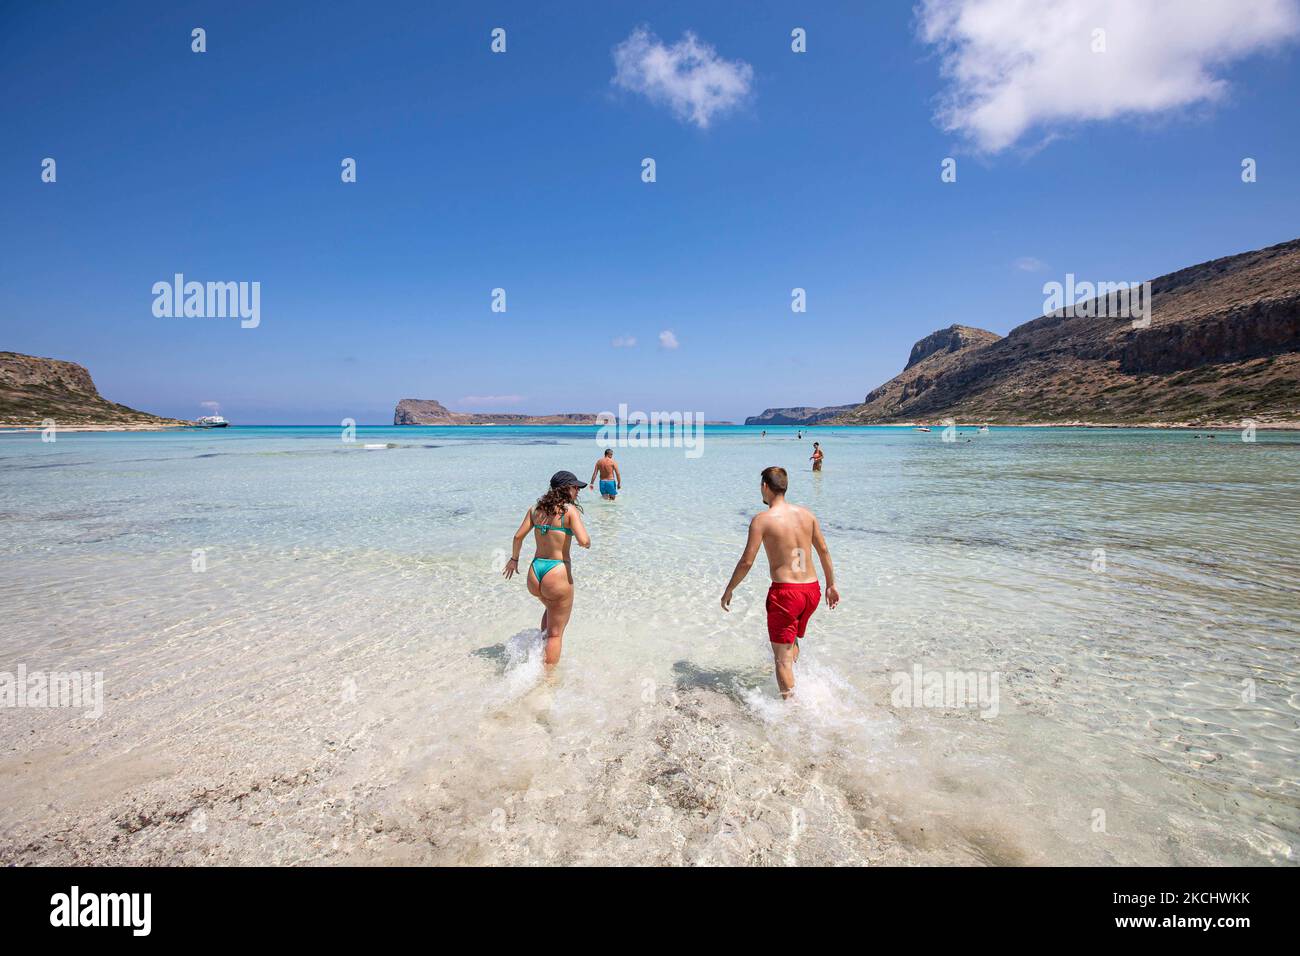 https://c8.alamy.com/comp/2KCHWKK/a-young-couple-enjoys-the-water-of-balos-as-they-run-or-walk-in-the-water-of-balos-beach-the-incredible-lagoon-with-the-pool-like-turquoise-exotic-and-tropical-water-of-the-mediterranean-sea-is-located-in-chania-region-in-crete-island-balos-is-one-of-the-most-visited-beaches-in-crete-and-popular-for-visitors-around-the-world-crystal-clear-water-the-lagoon-rocky-steep-mountains-a-beach-bar-providing-umbrellas-and-shadow-with-beverages-and-a-pirate-island-are-located-at-the-same-region-that-is-accessible-by-a-20-min-trek-or-boat-greece-is-trying-to-boost-its-tourism-and-give-privileges-2KCHWKK.jpg